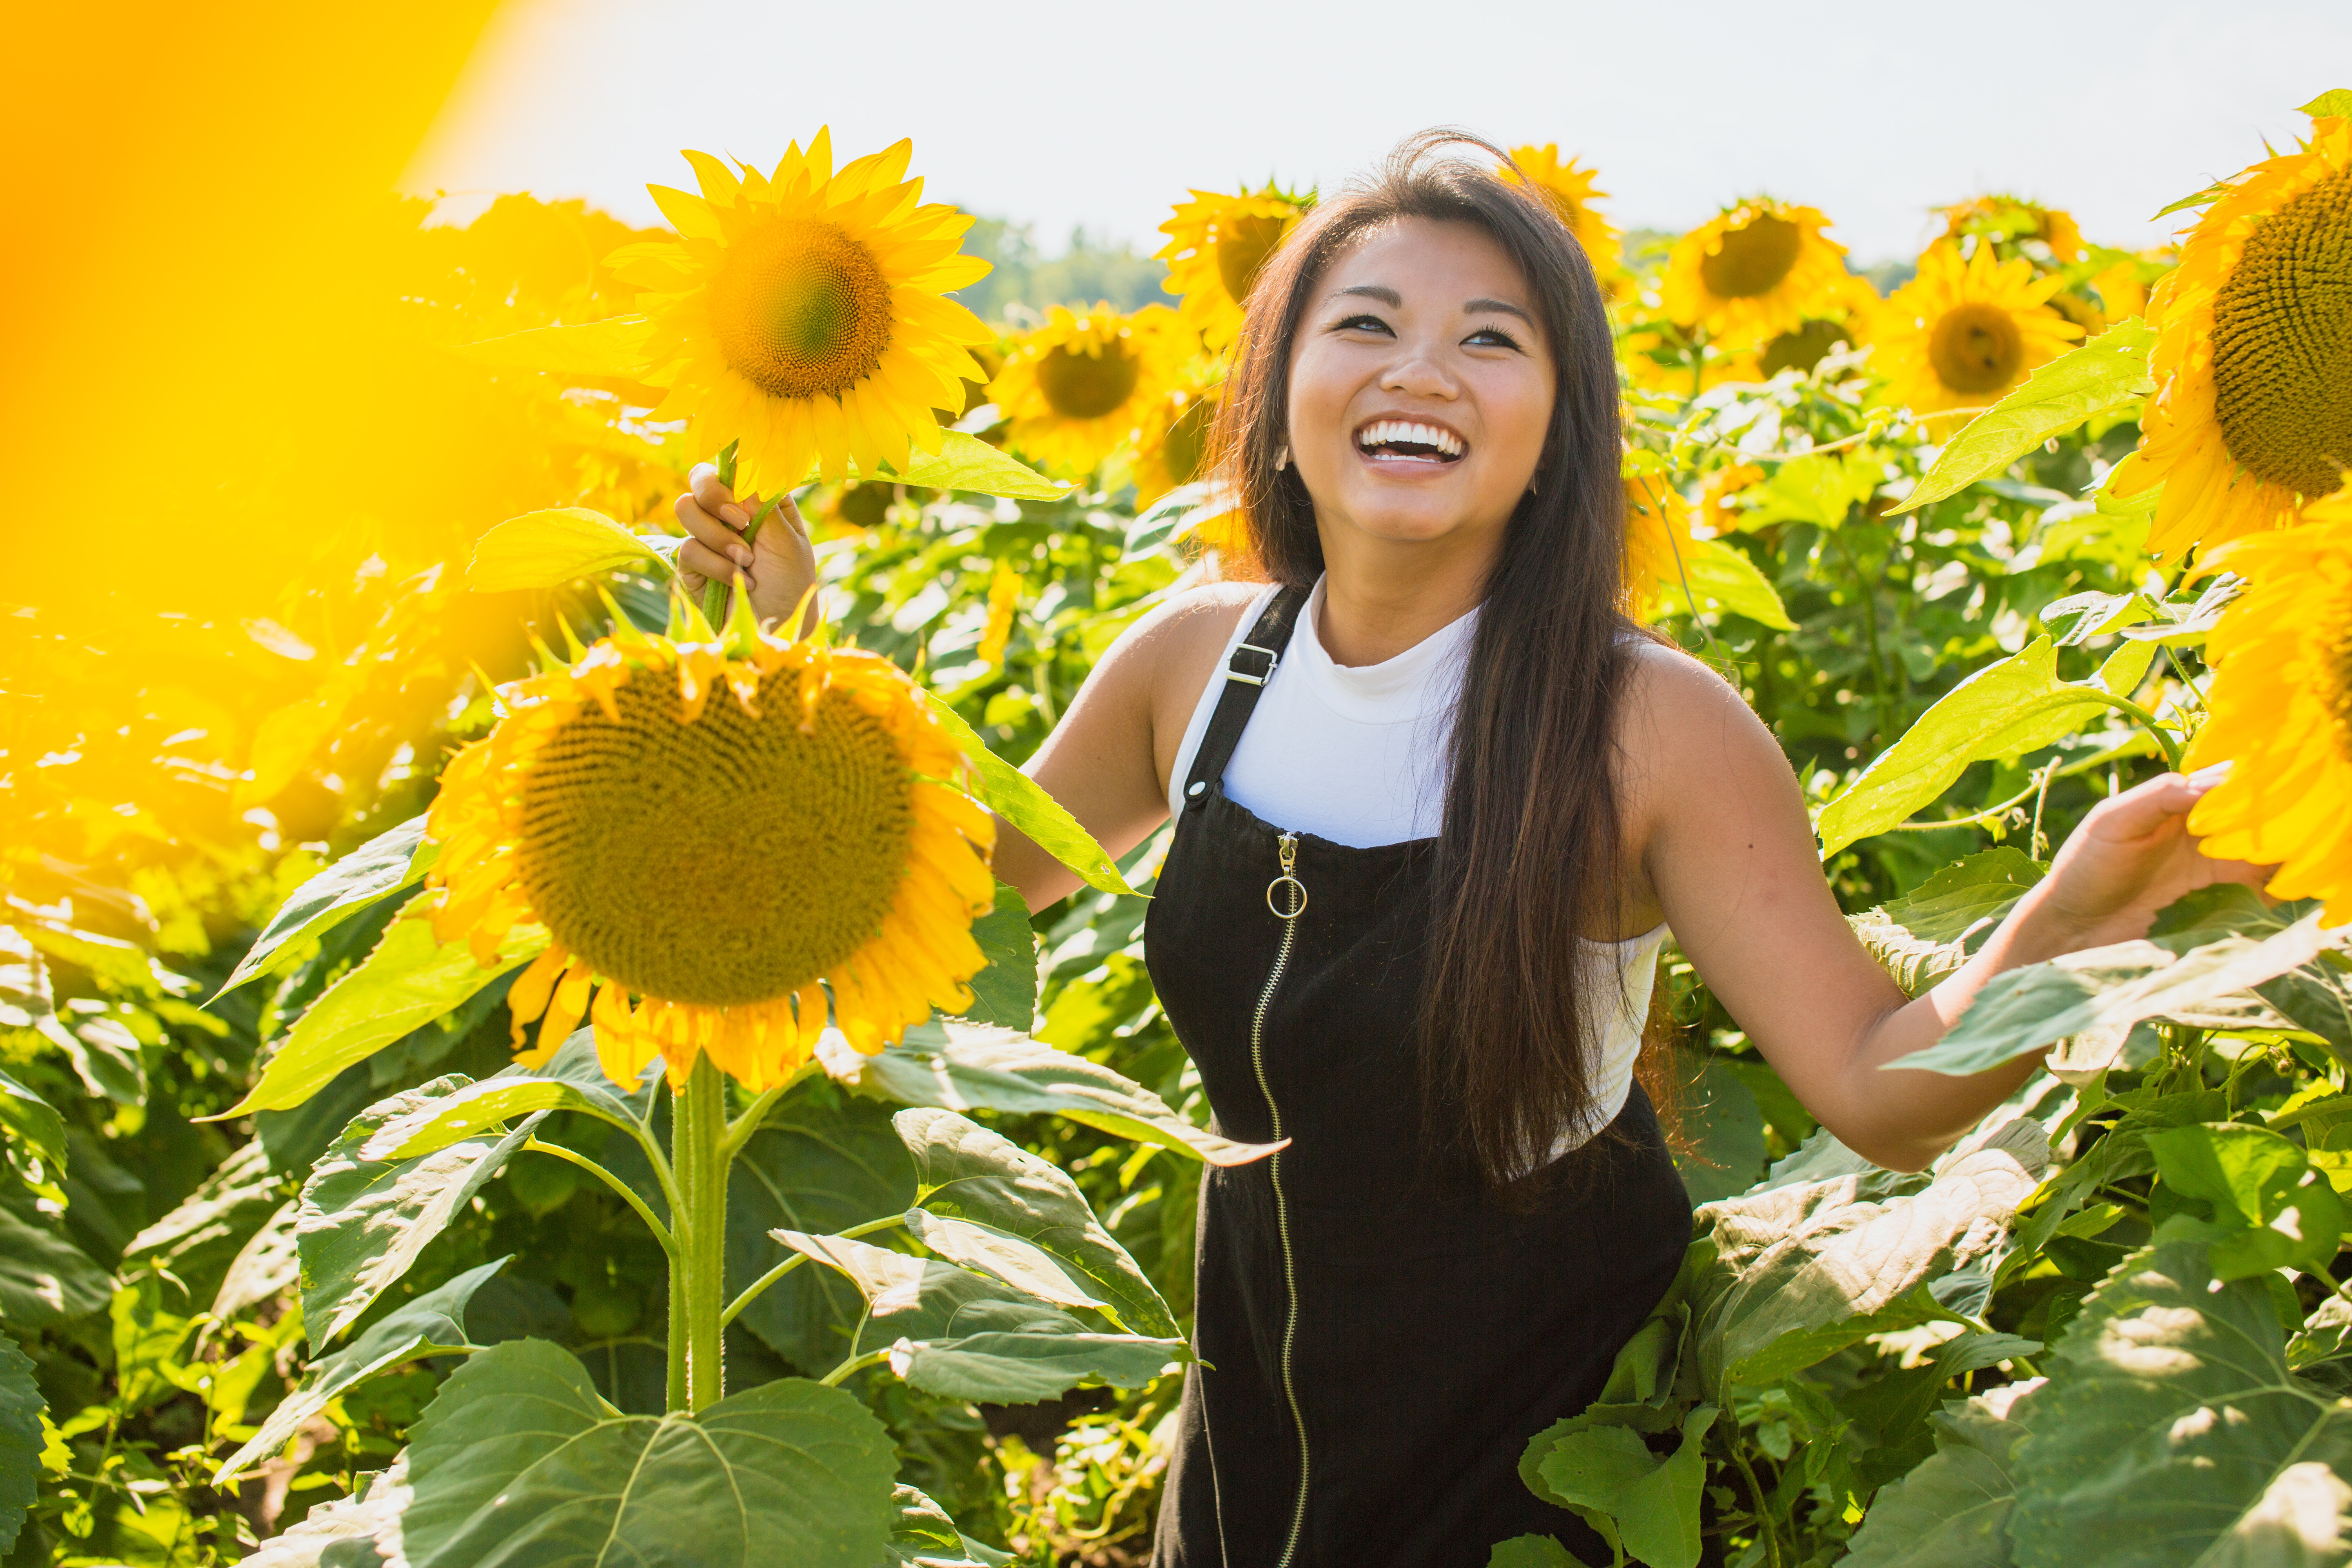 teen patient with invisalign smiling in a sunflower farm